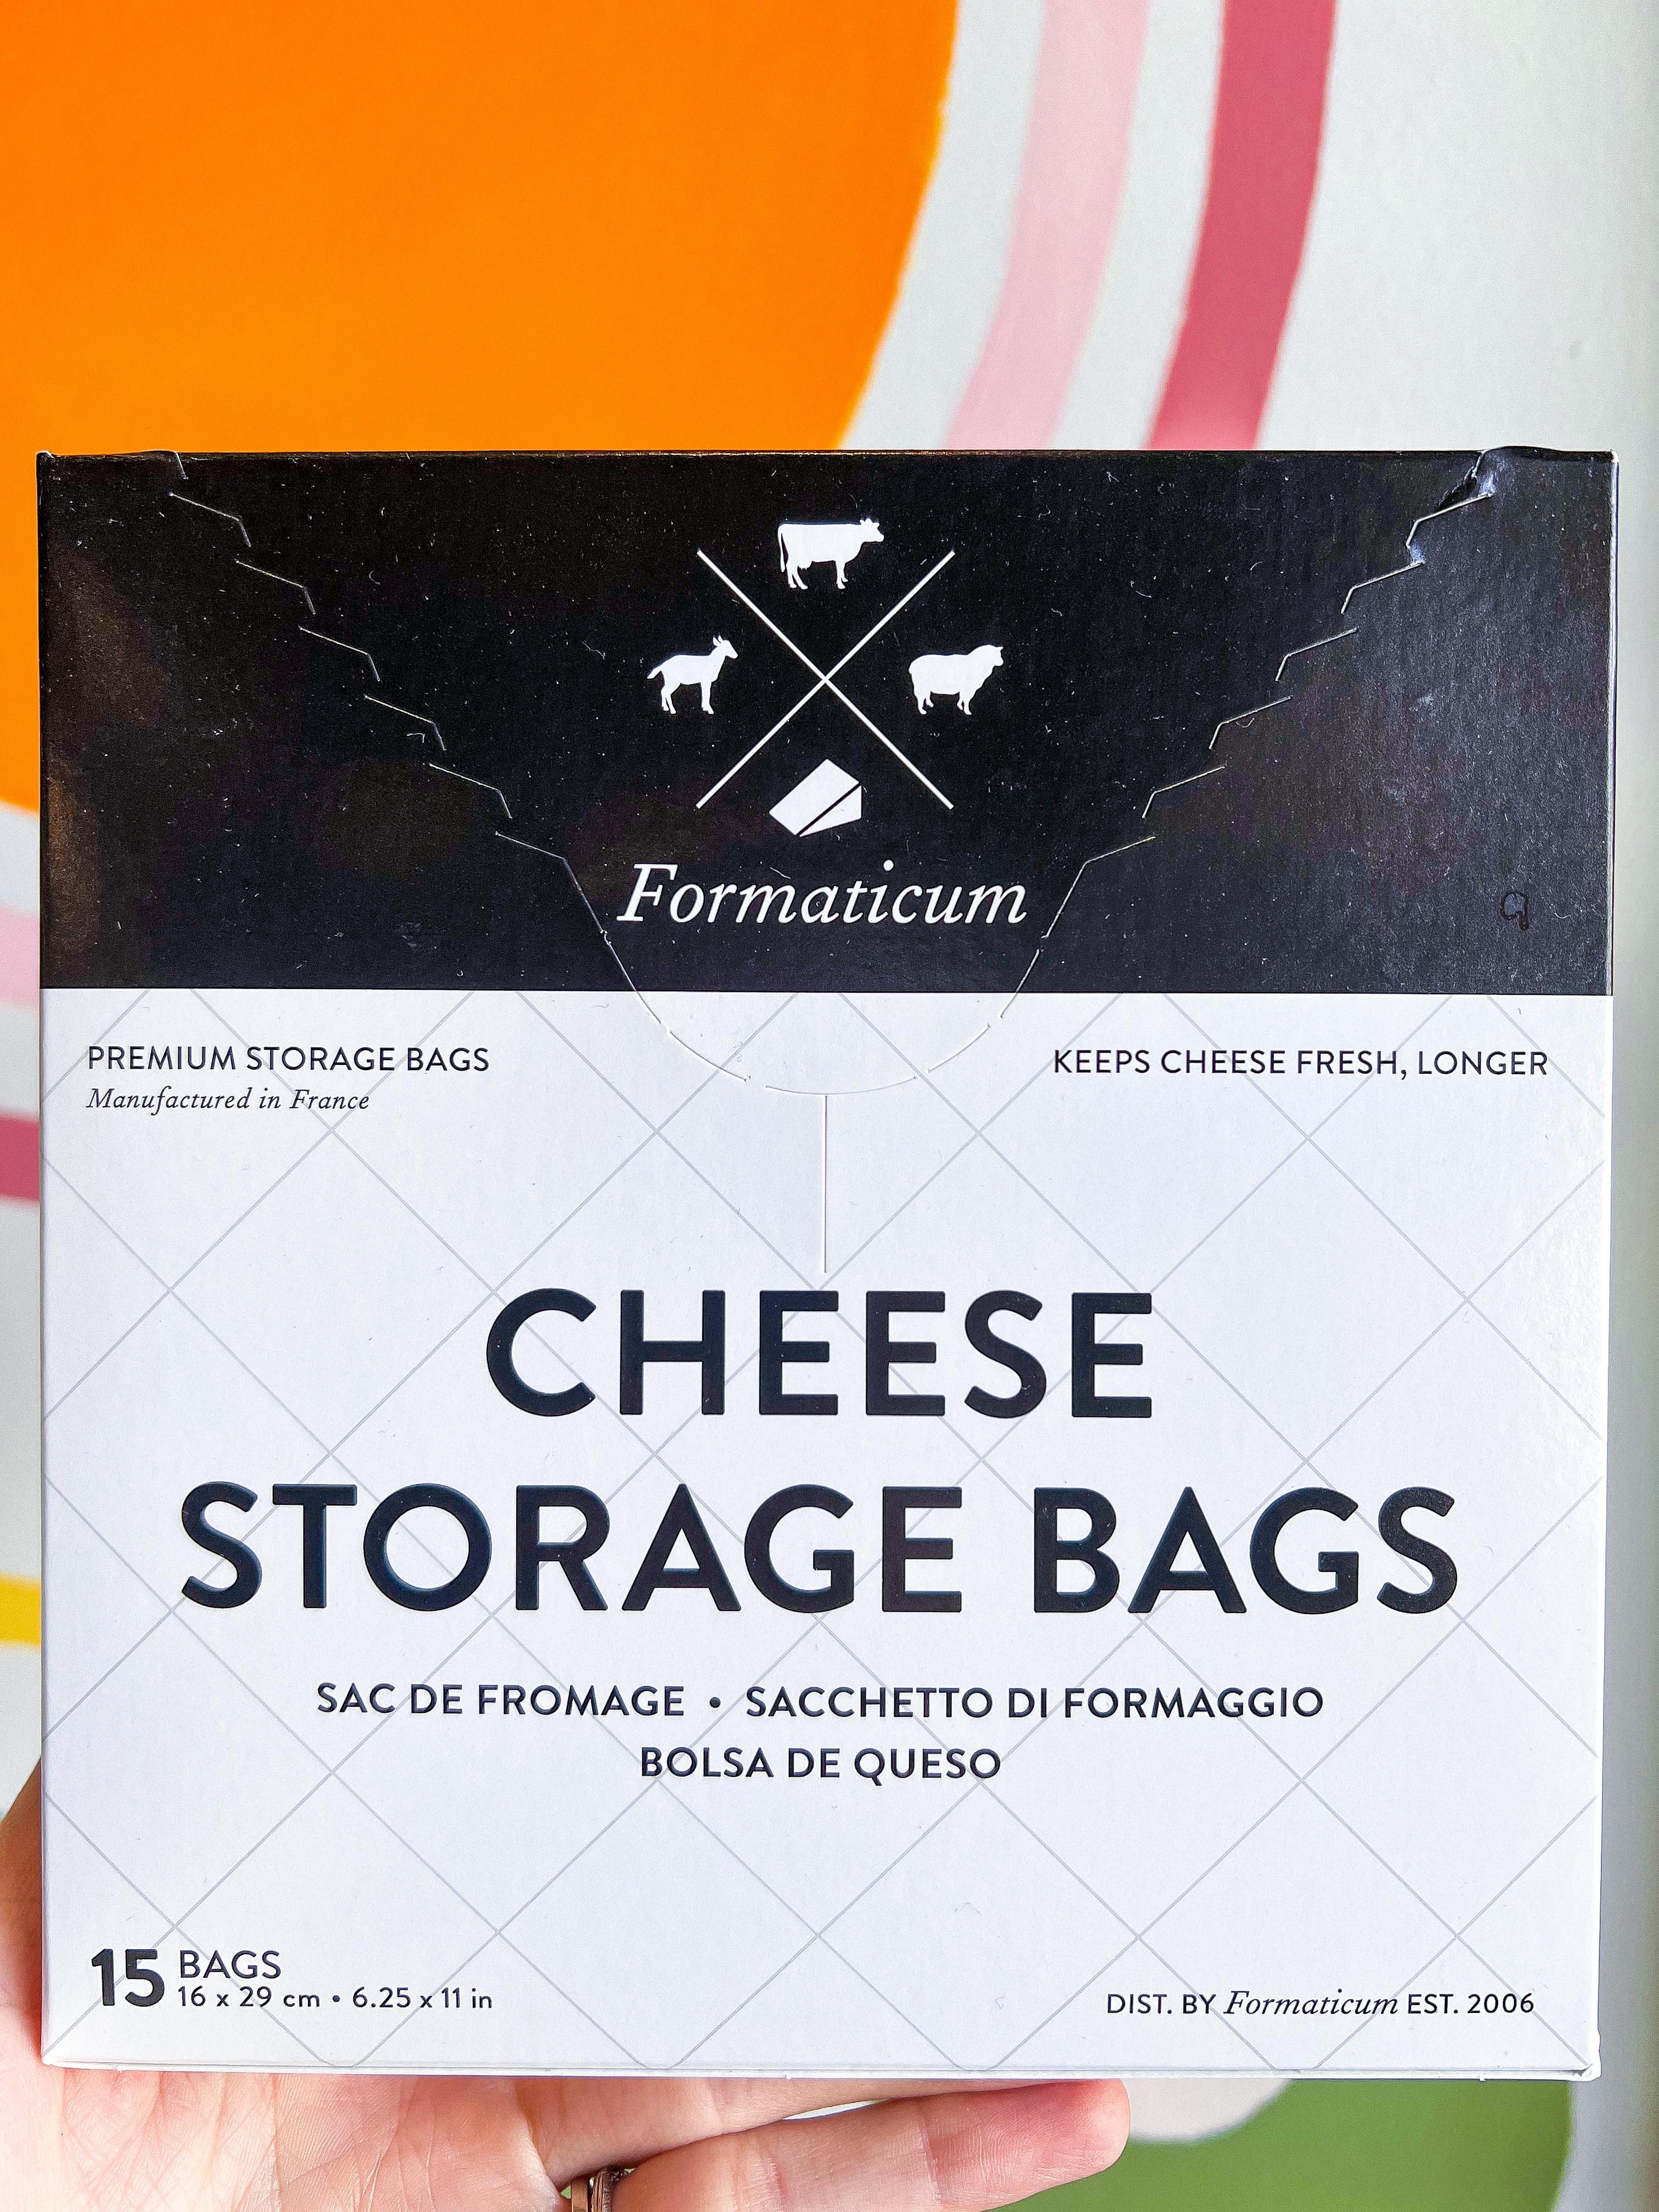 CHEESE STORAGE BAGS